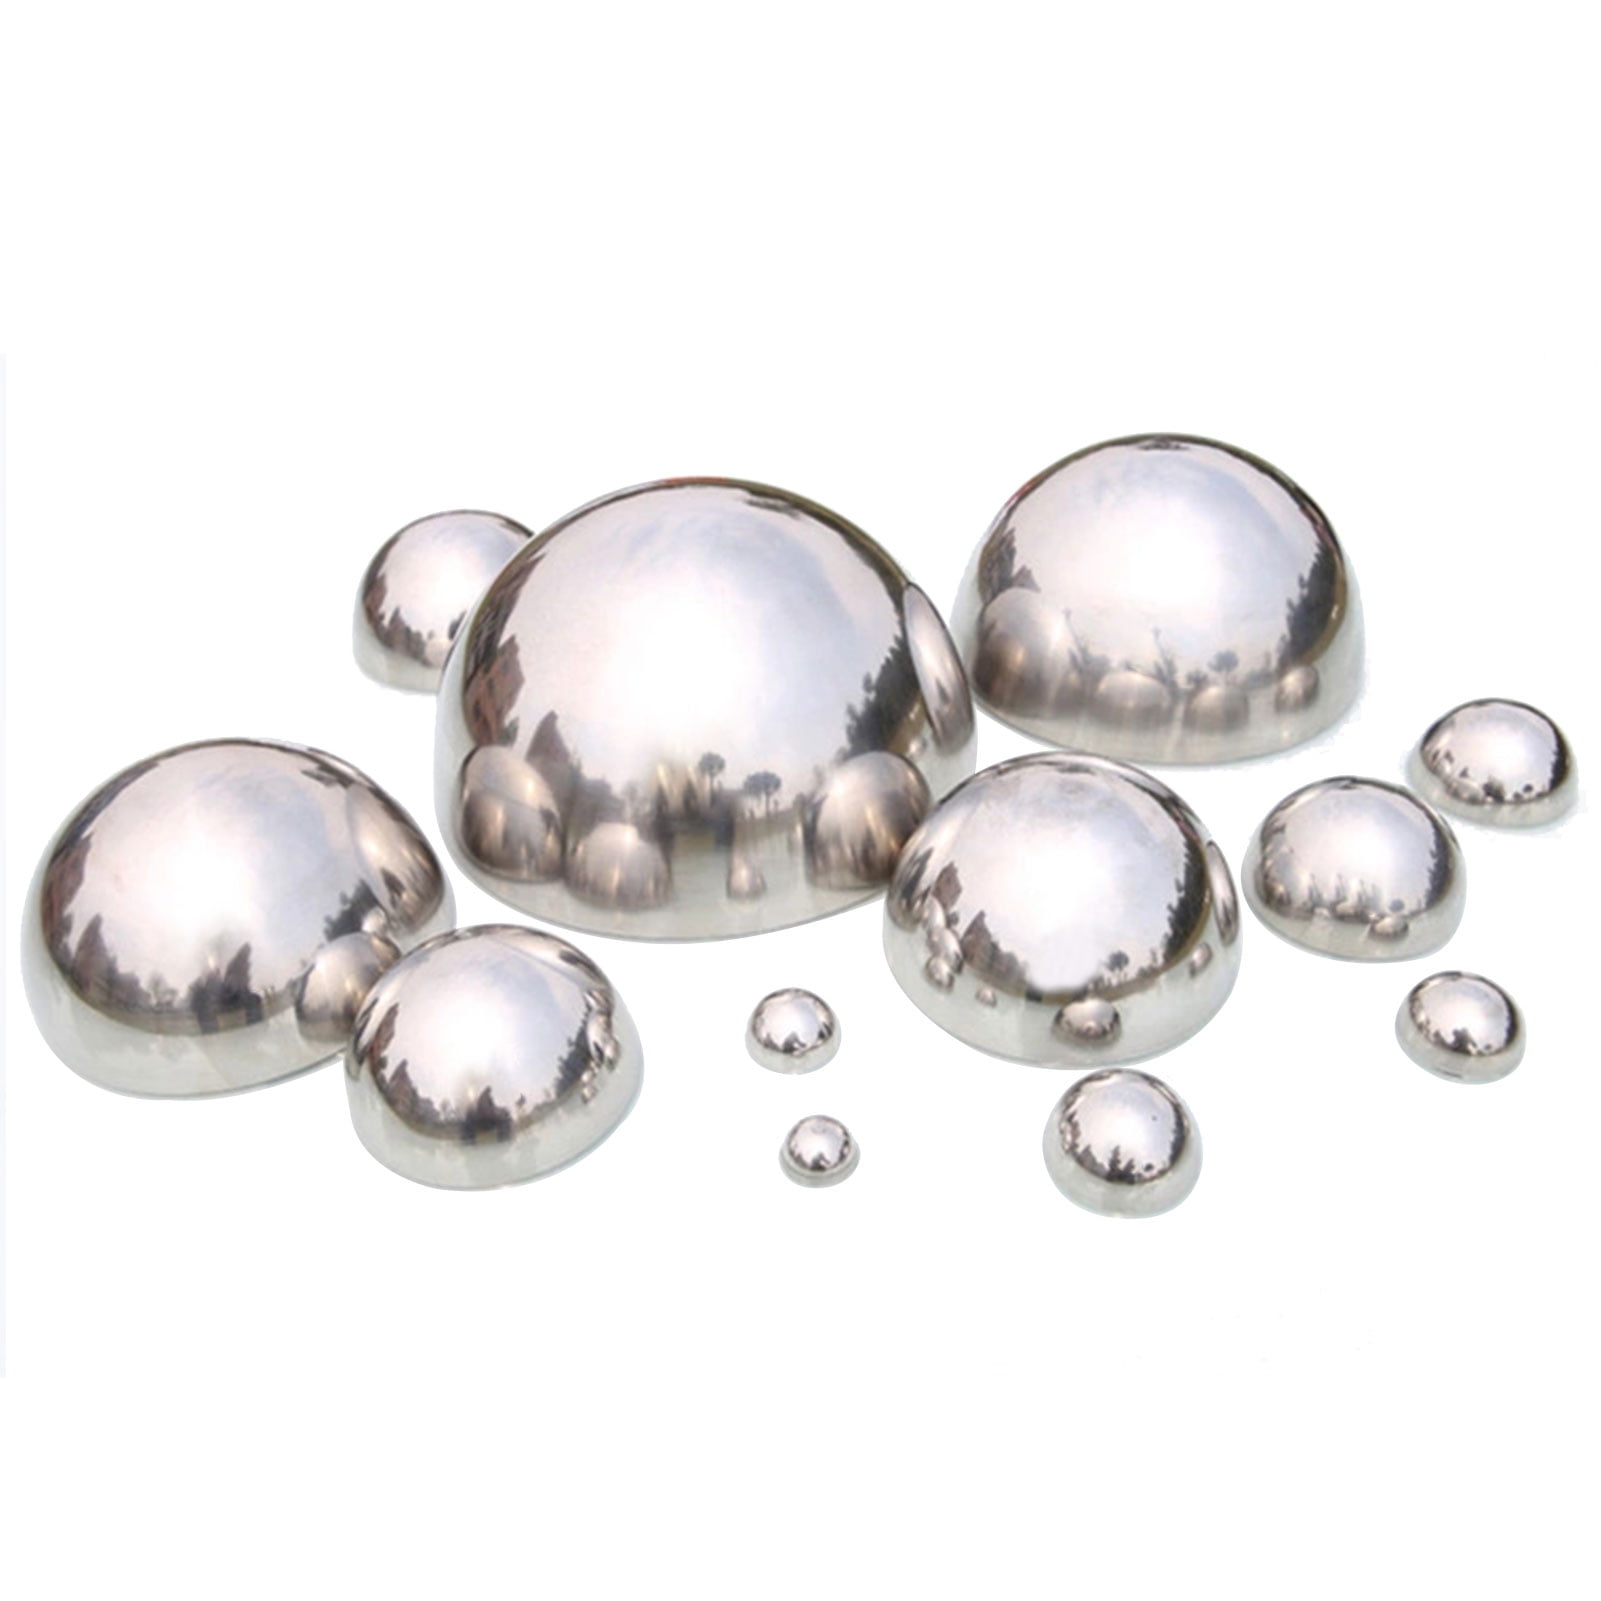 Mirror Polished Sphere Hollow Ball Home Garden Ornament Decor Stainless Steel 